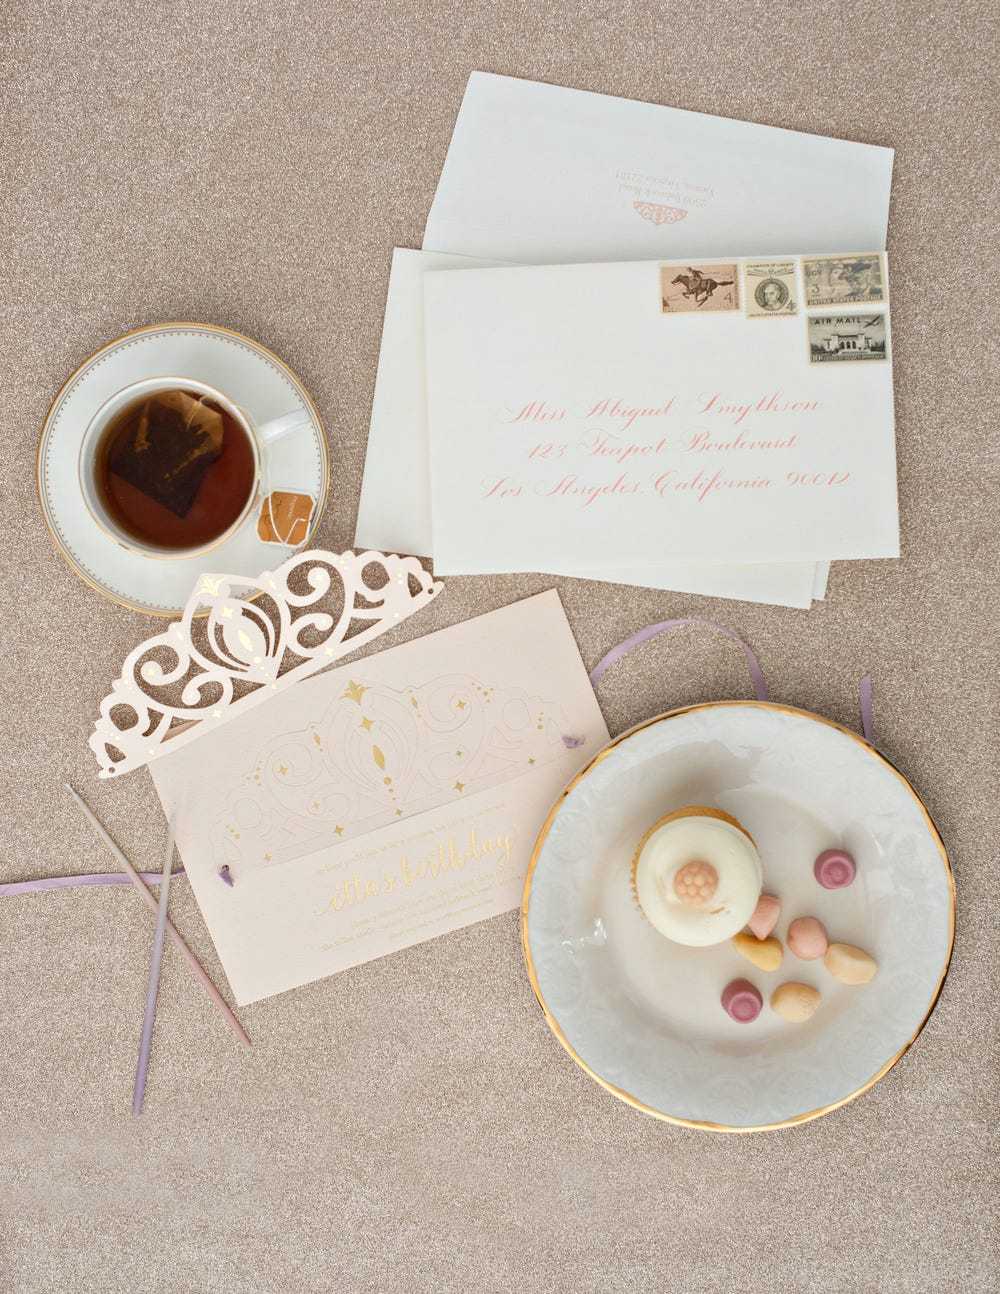 Wedding Invitation Ideas Cheap Card Invites Stationary For Paper Source Templates Place Cards